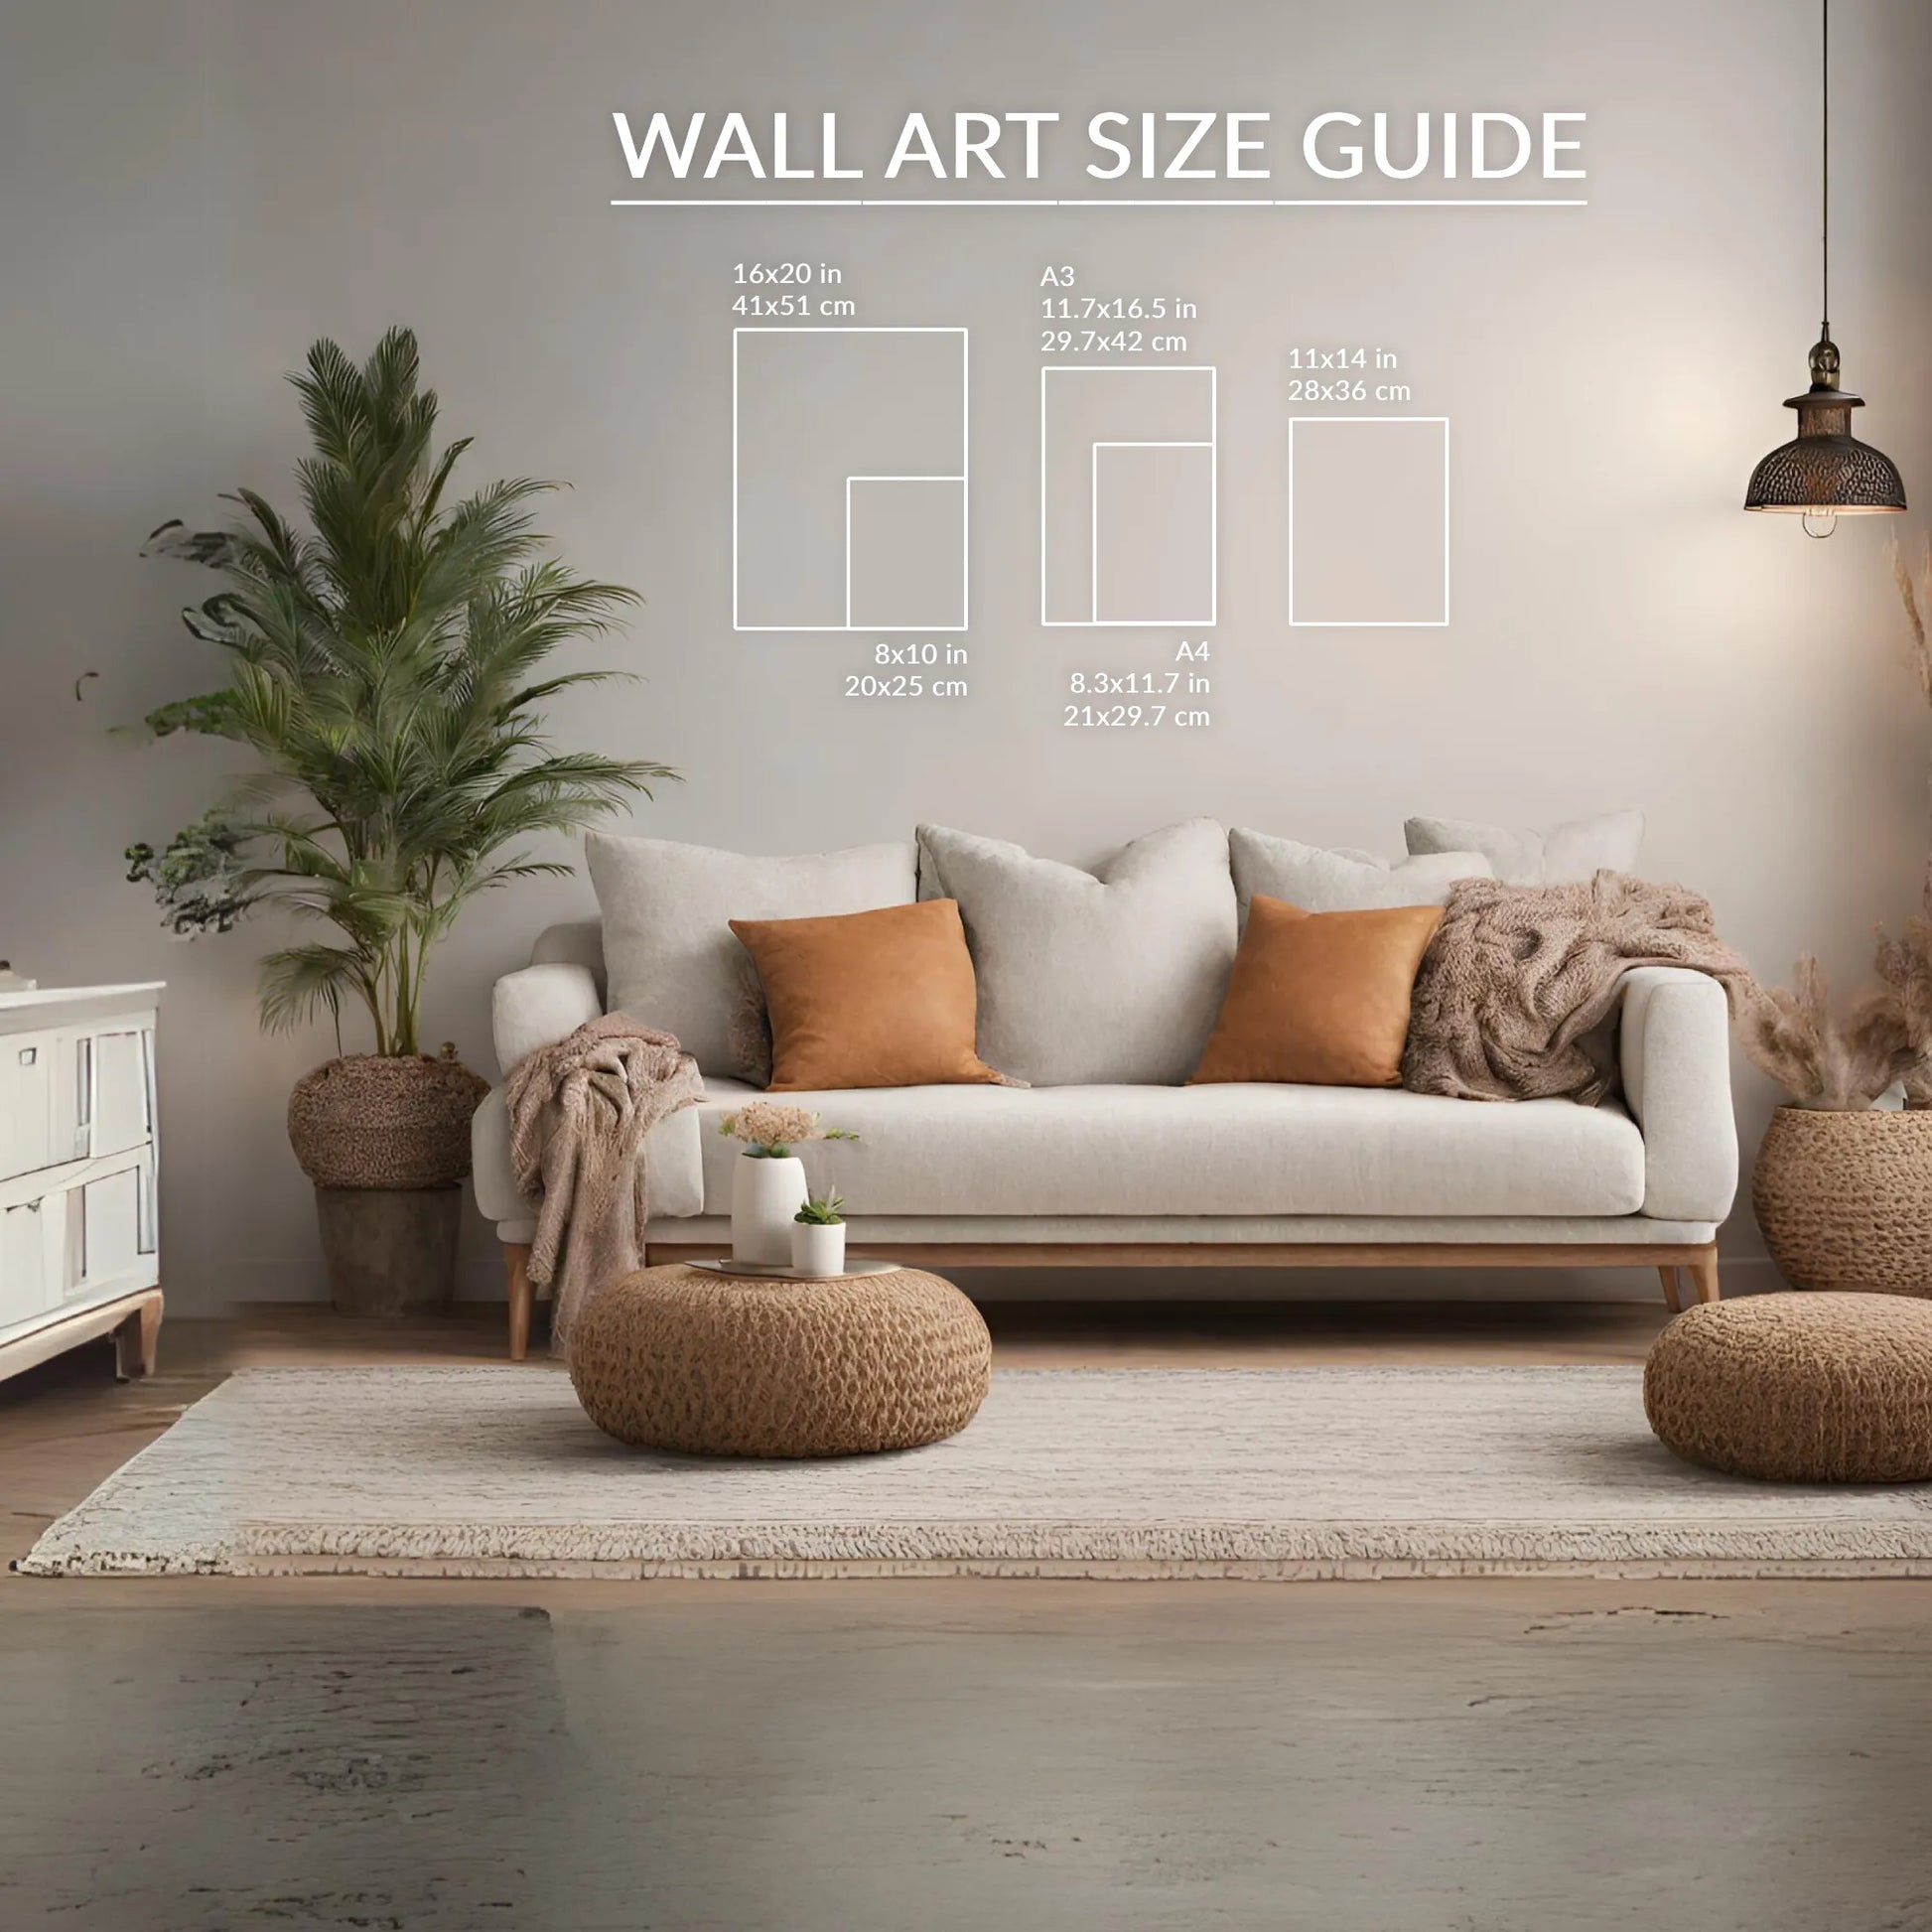 Editable Collage Template Wall Art Size Guide